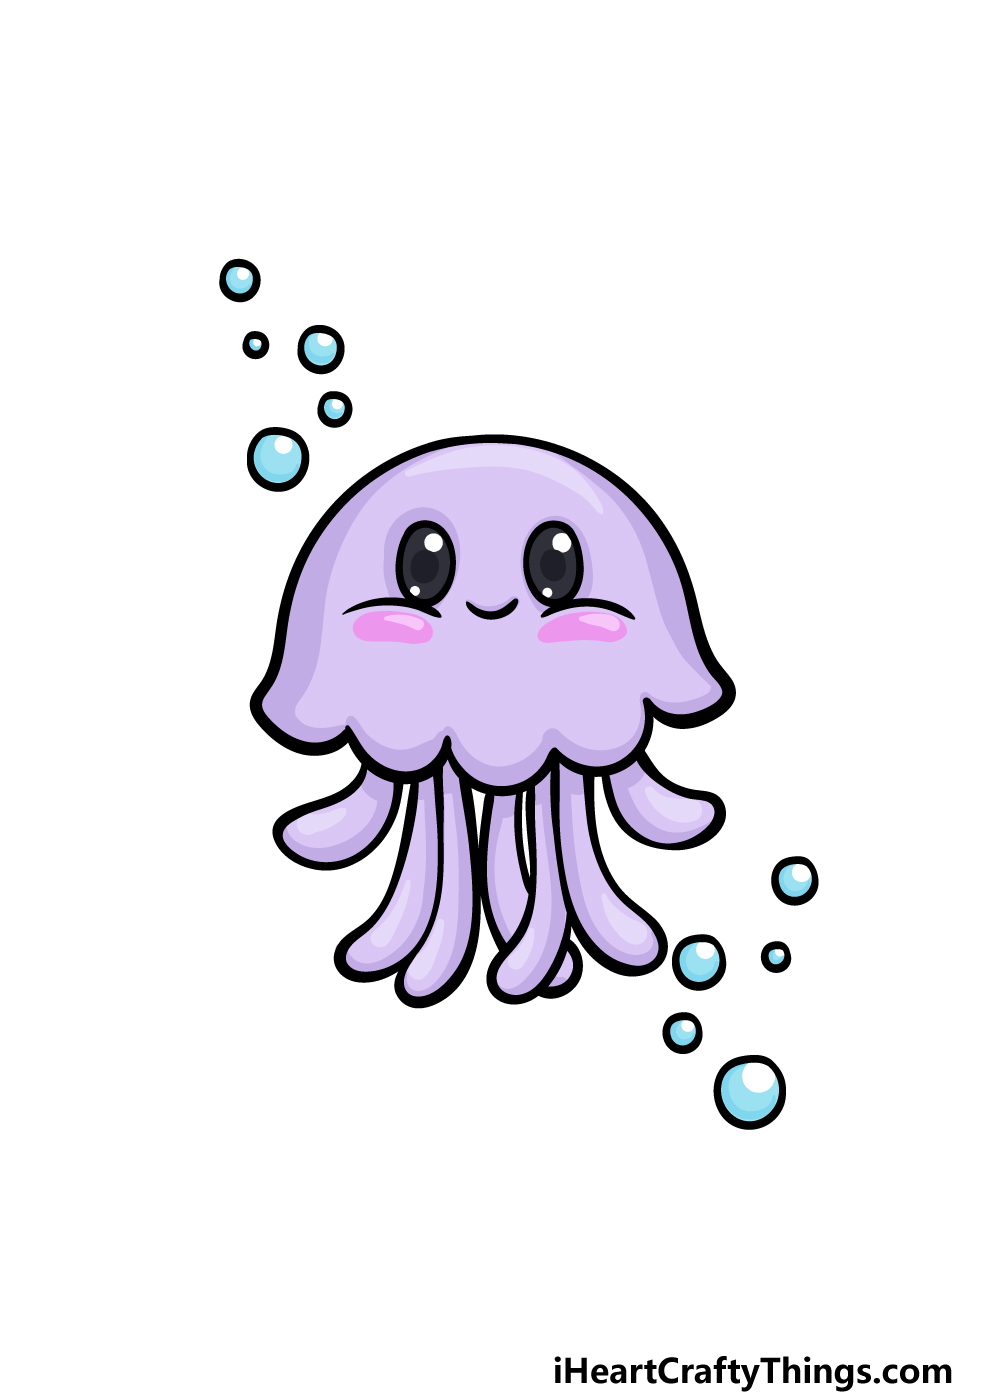 Jellyfish Drawing Tutorial - How to draw Jellyfish step by step